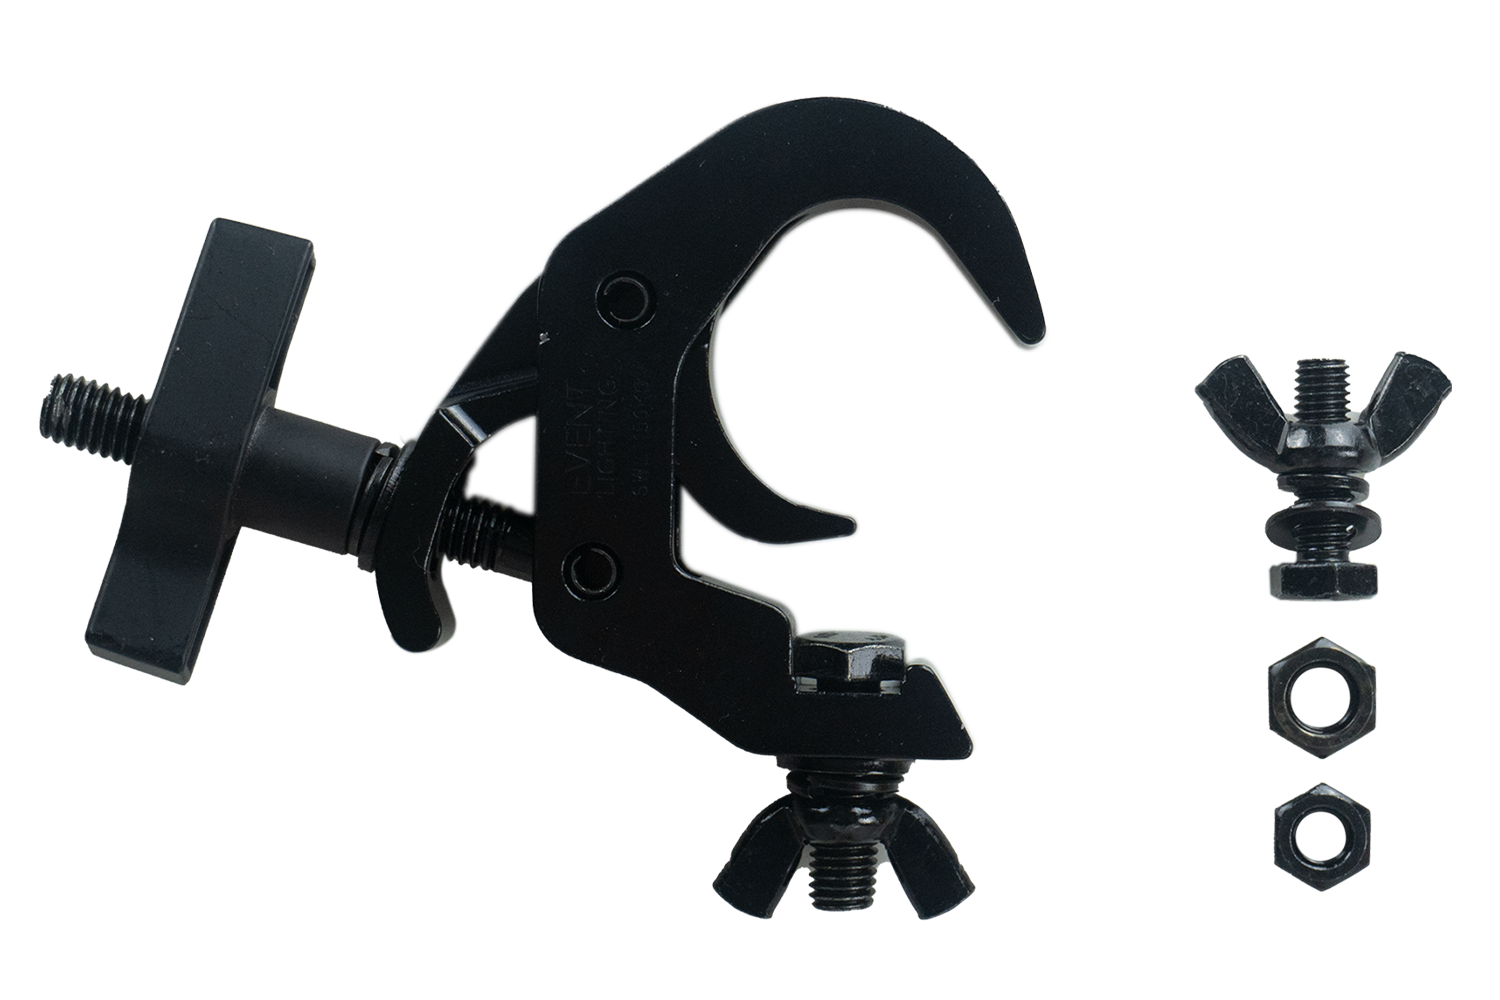 Event Lighting CLAMPT50 trigger clamp